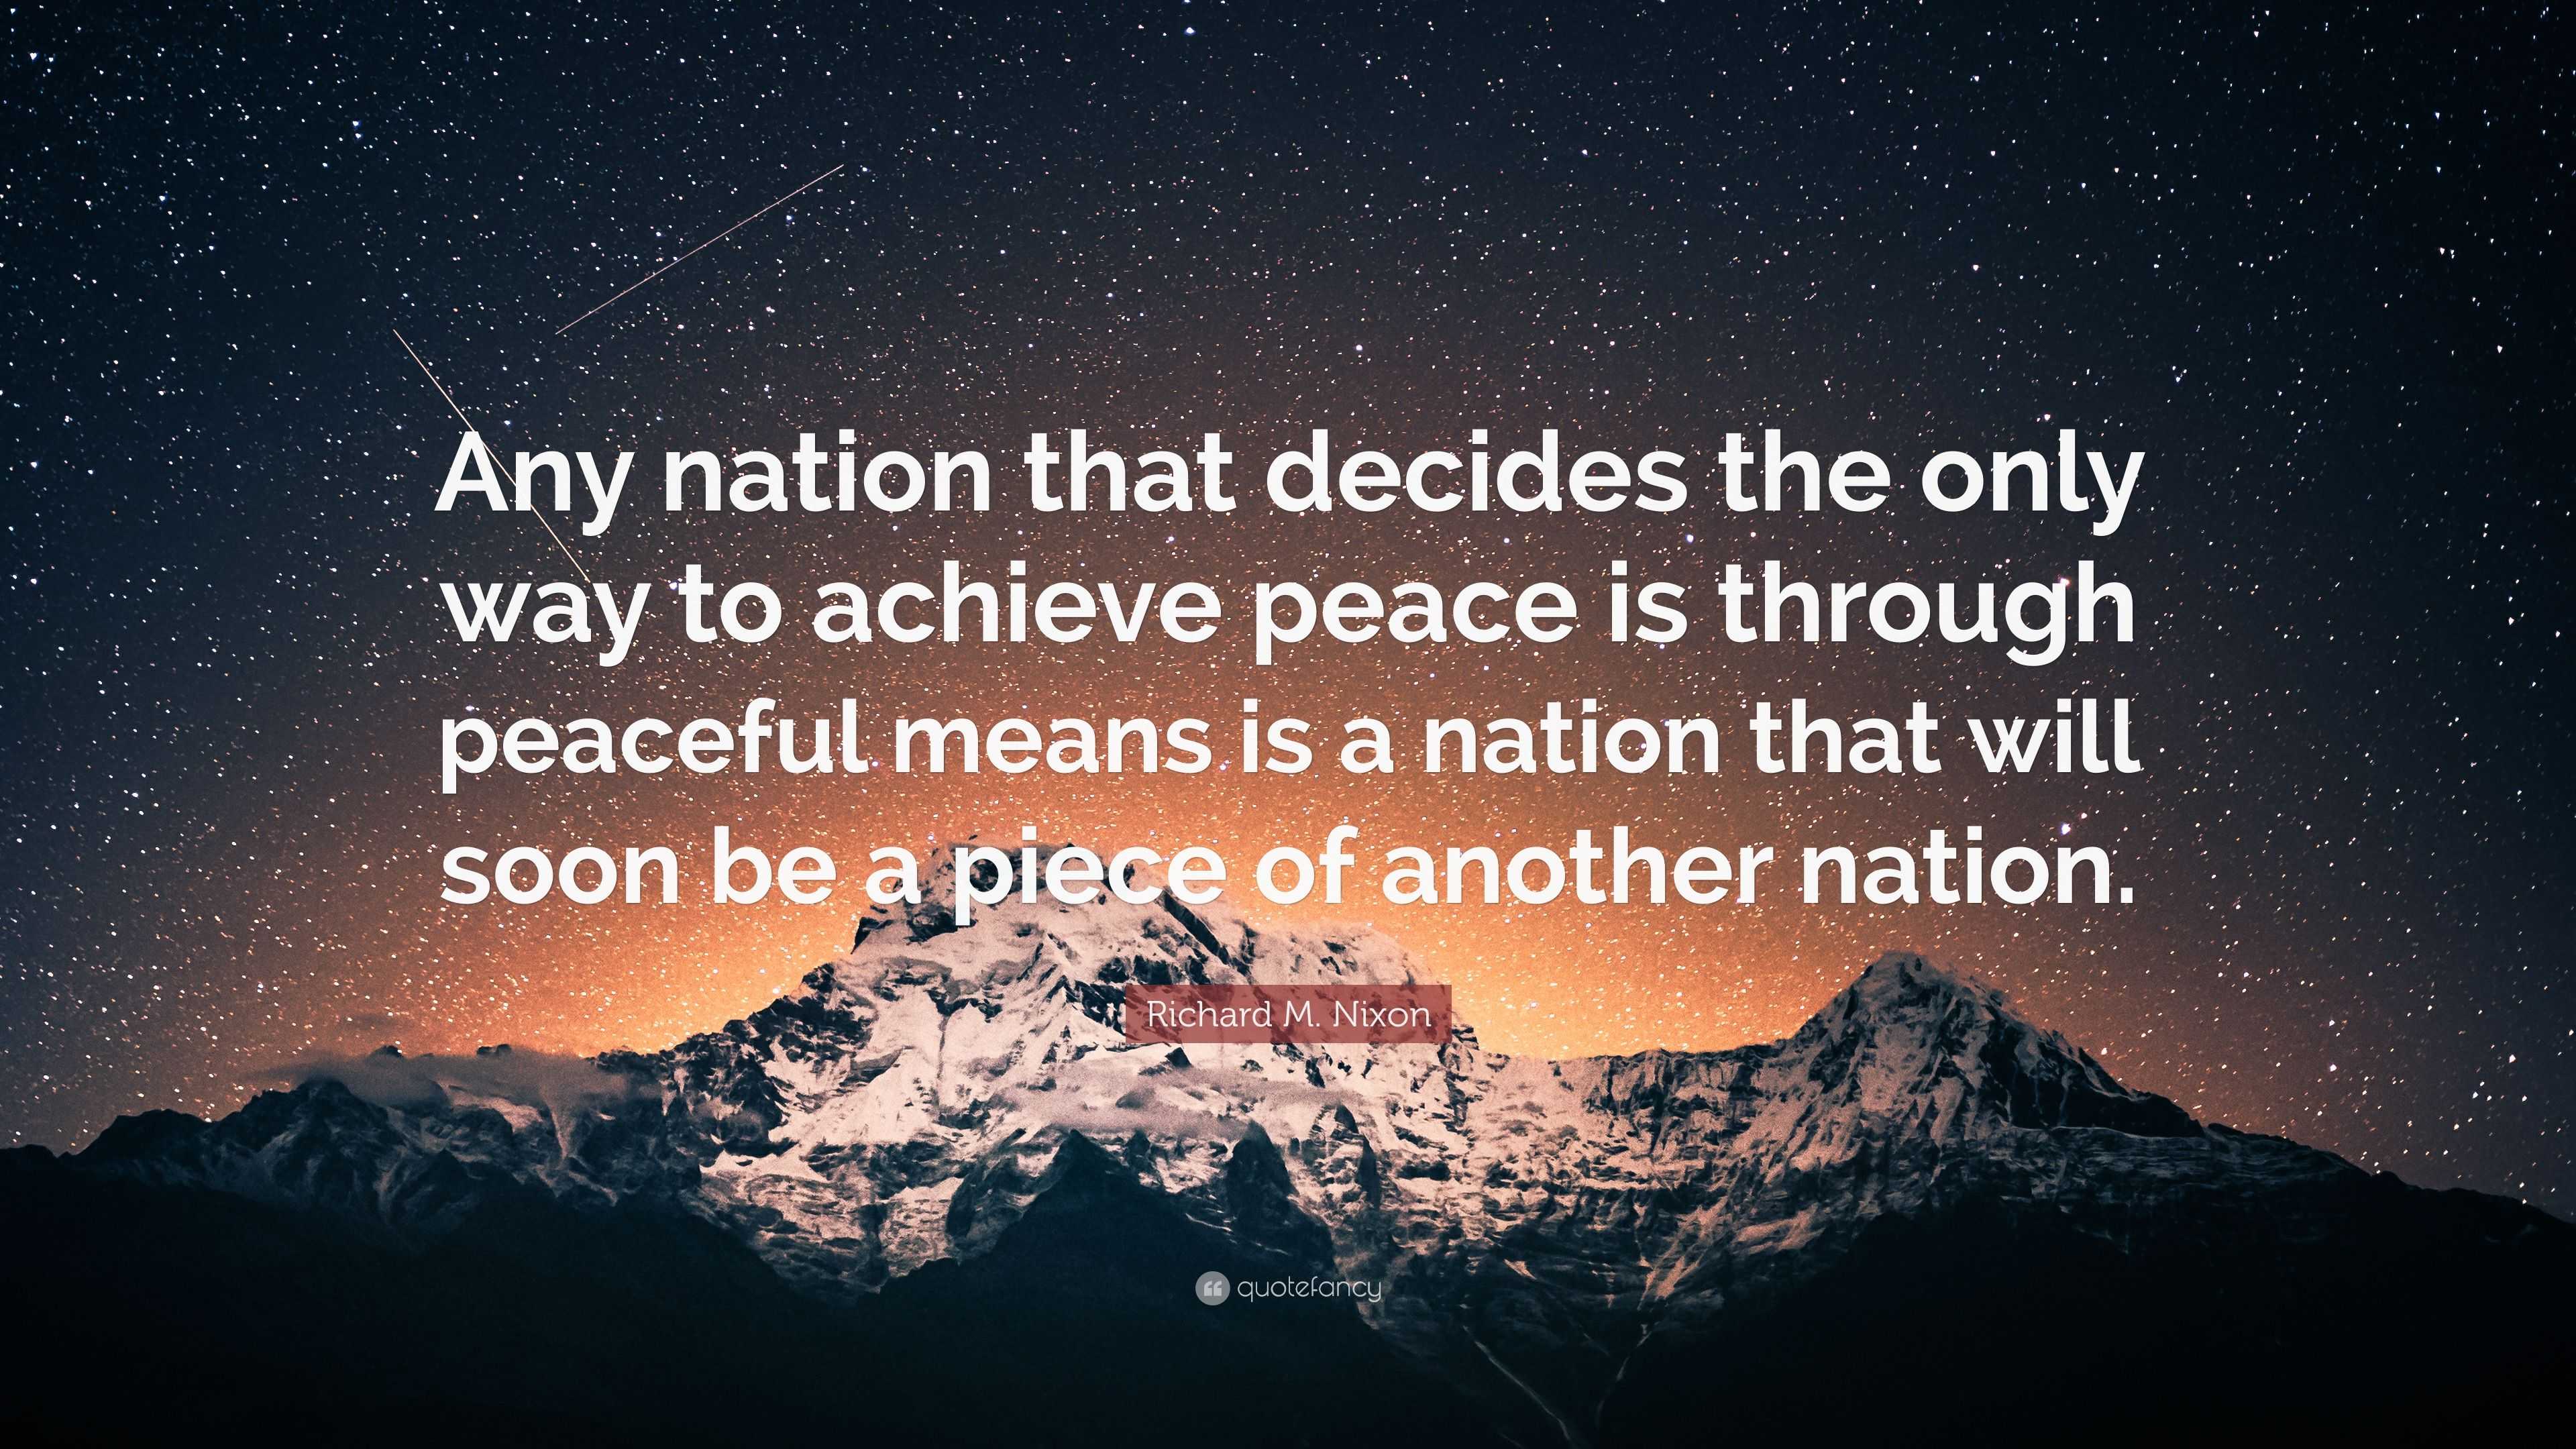 Richard M Nixon Quote Any Nation That Decides The Only Way To Achieve Peace Is Through Peaceful Means Is A Nation That Will Soon Be A Piece Of